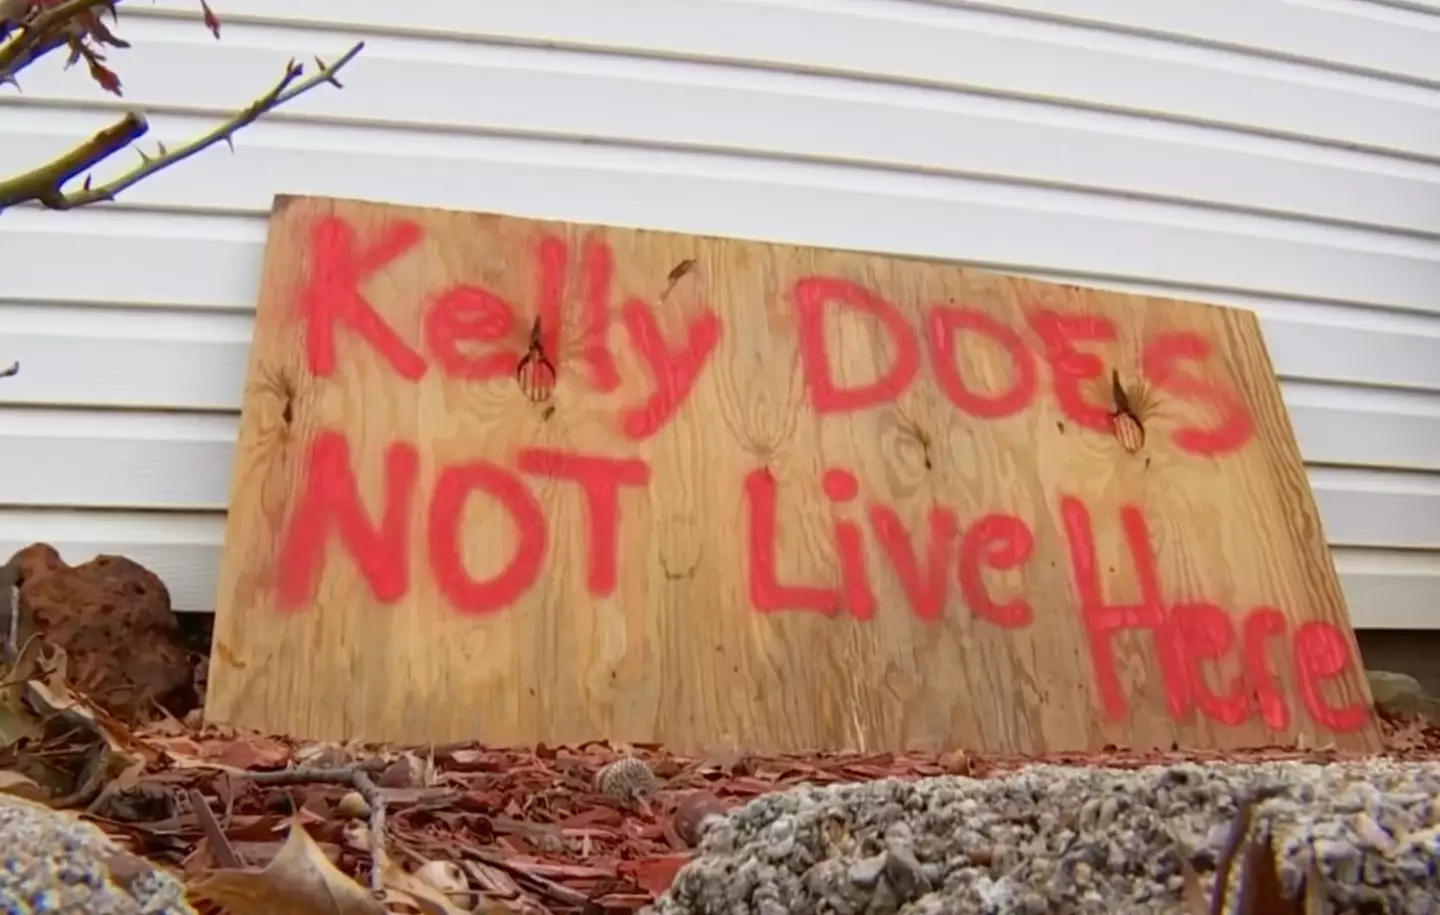 'Kelly does not live here'.